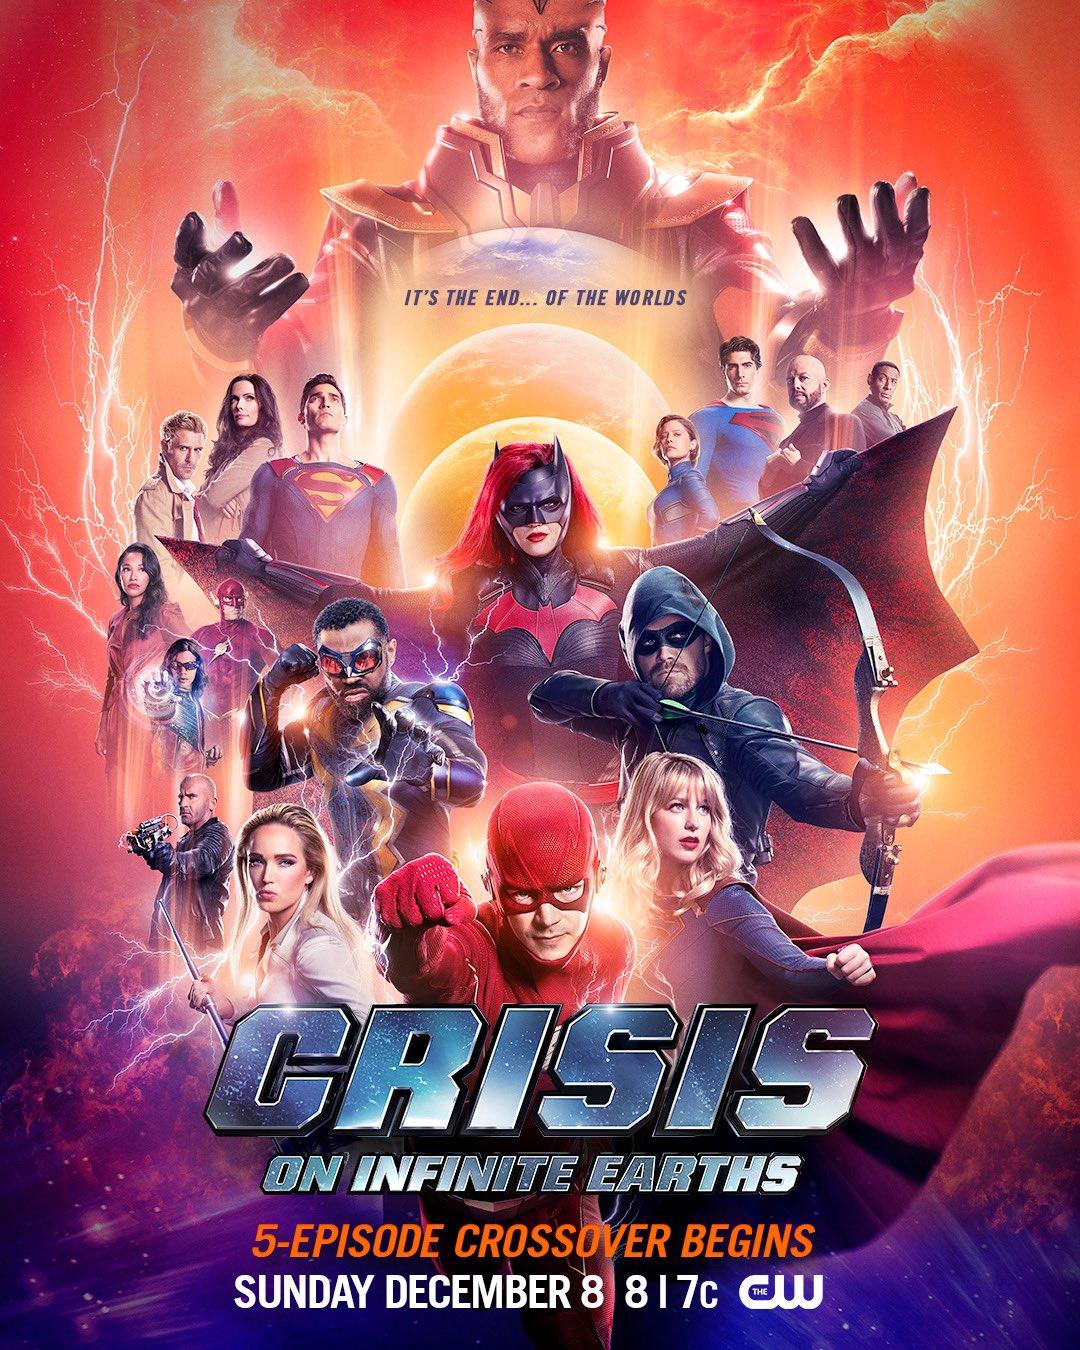 First Crisis on Infinite Earths Poster Teases Epic DC